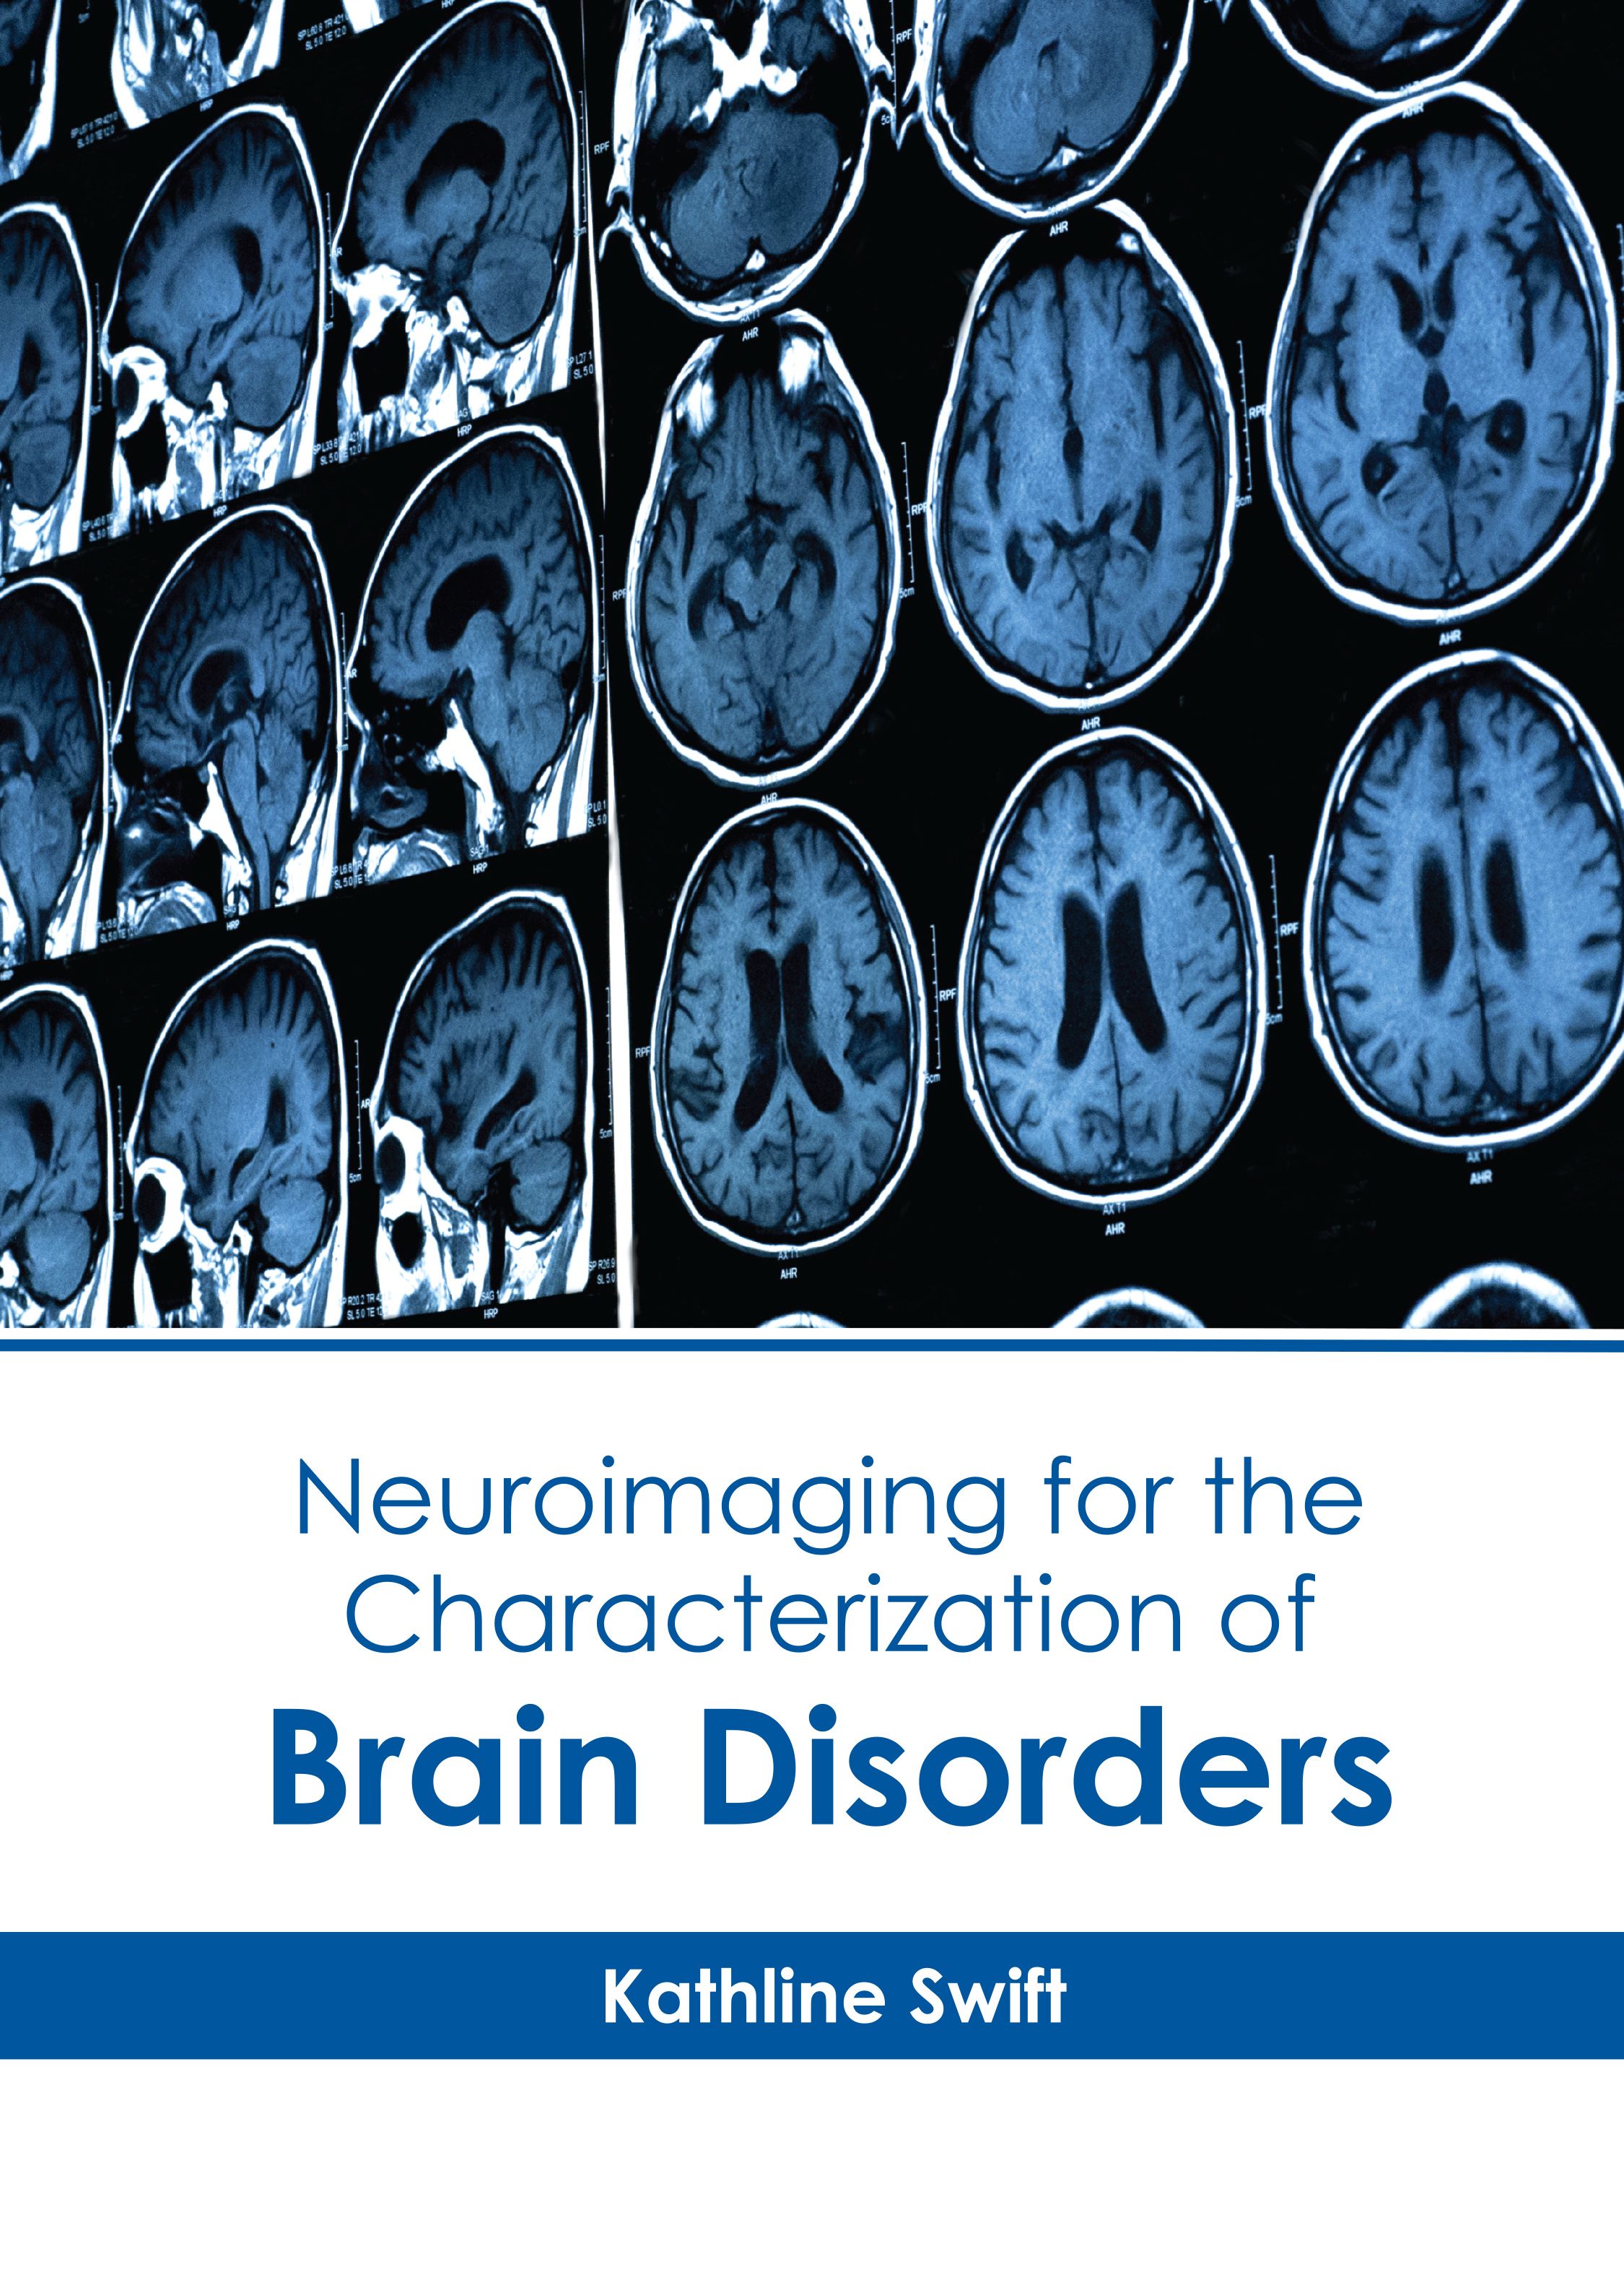 NEUROIMAGING FOR THE CHARACTERIZATION OF BRAIN DISORDERS